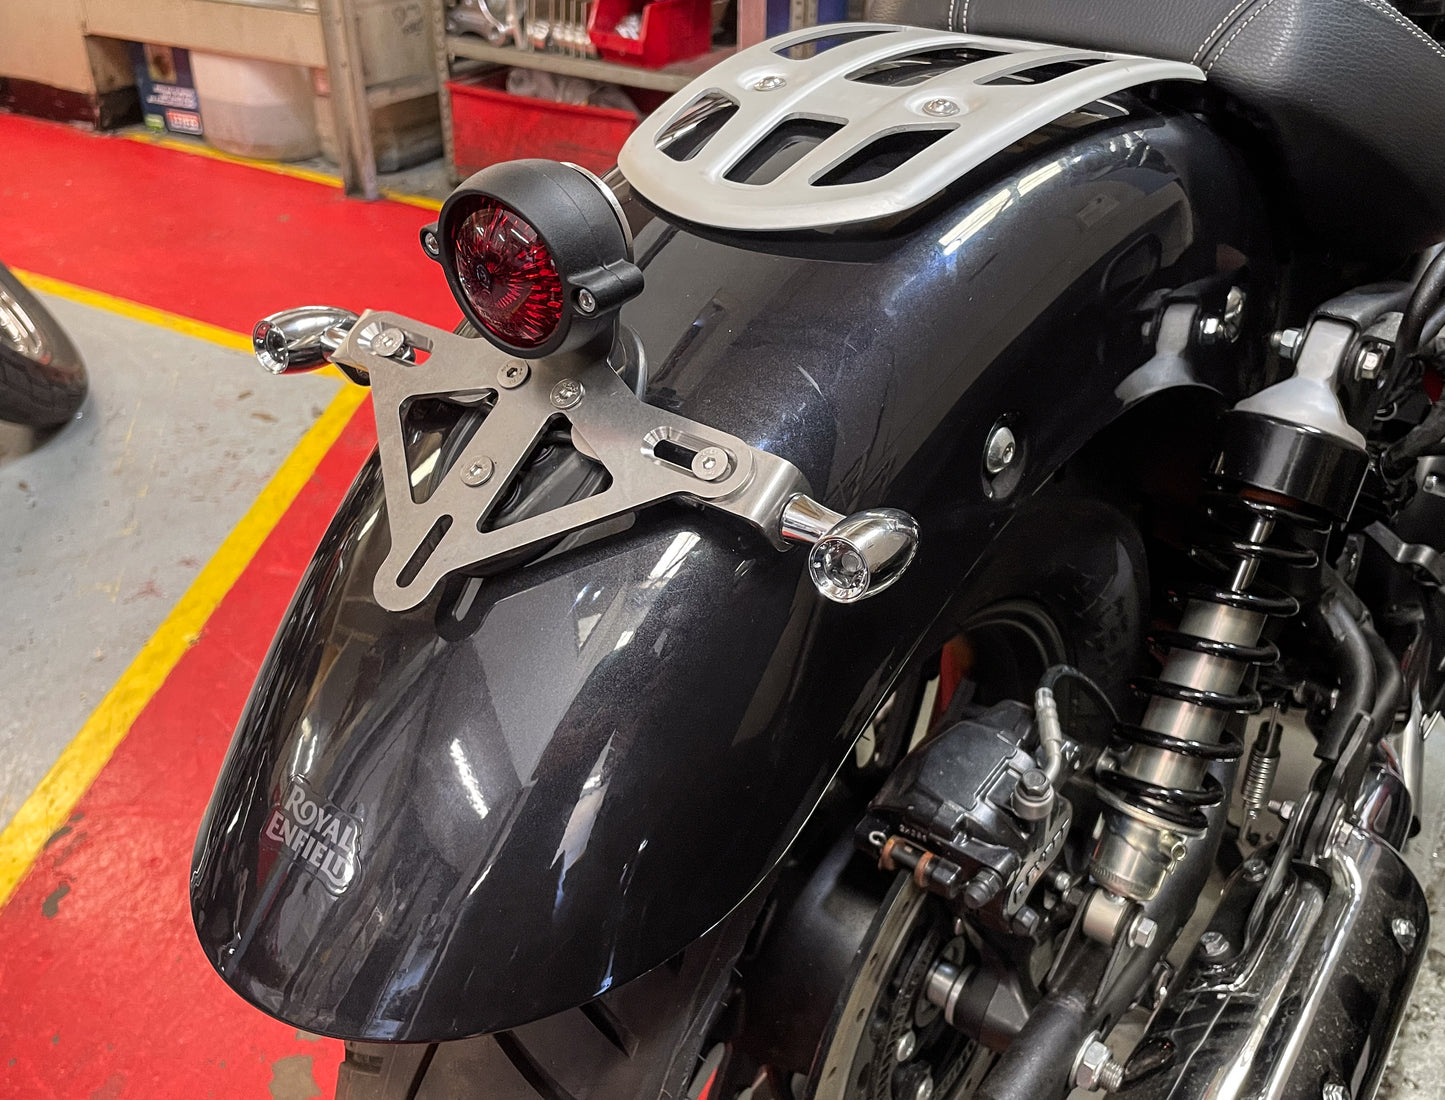 Tail Tidy Kit for Royal Enfield Super Meteor 650